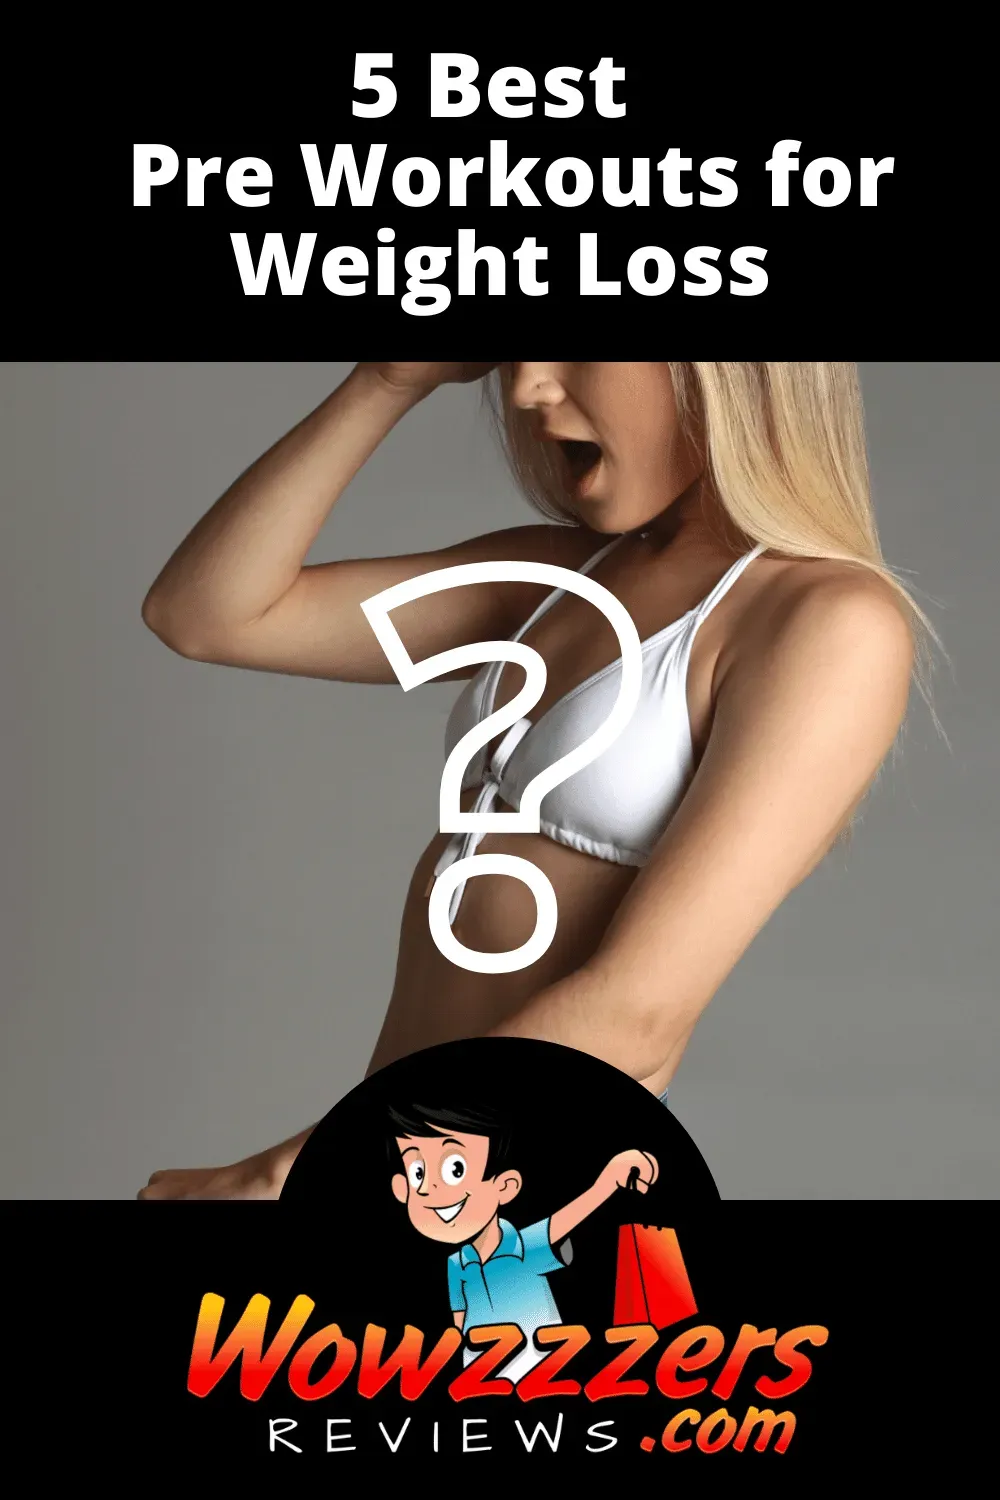 Best Pre Workout for Weight Loss